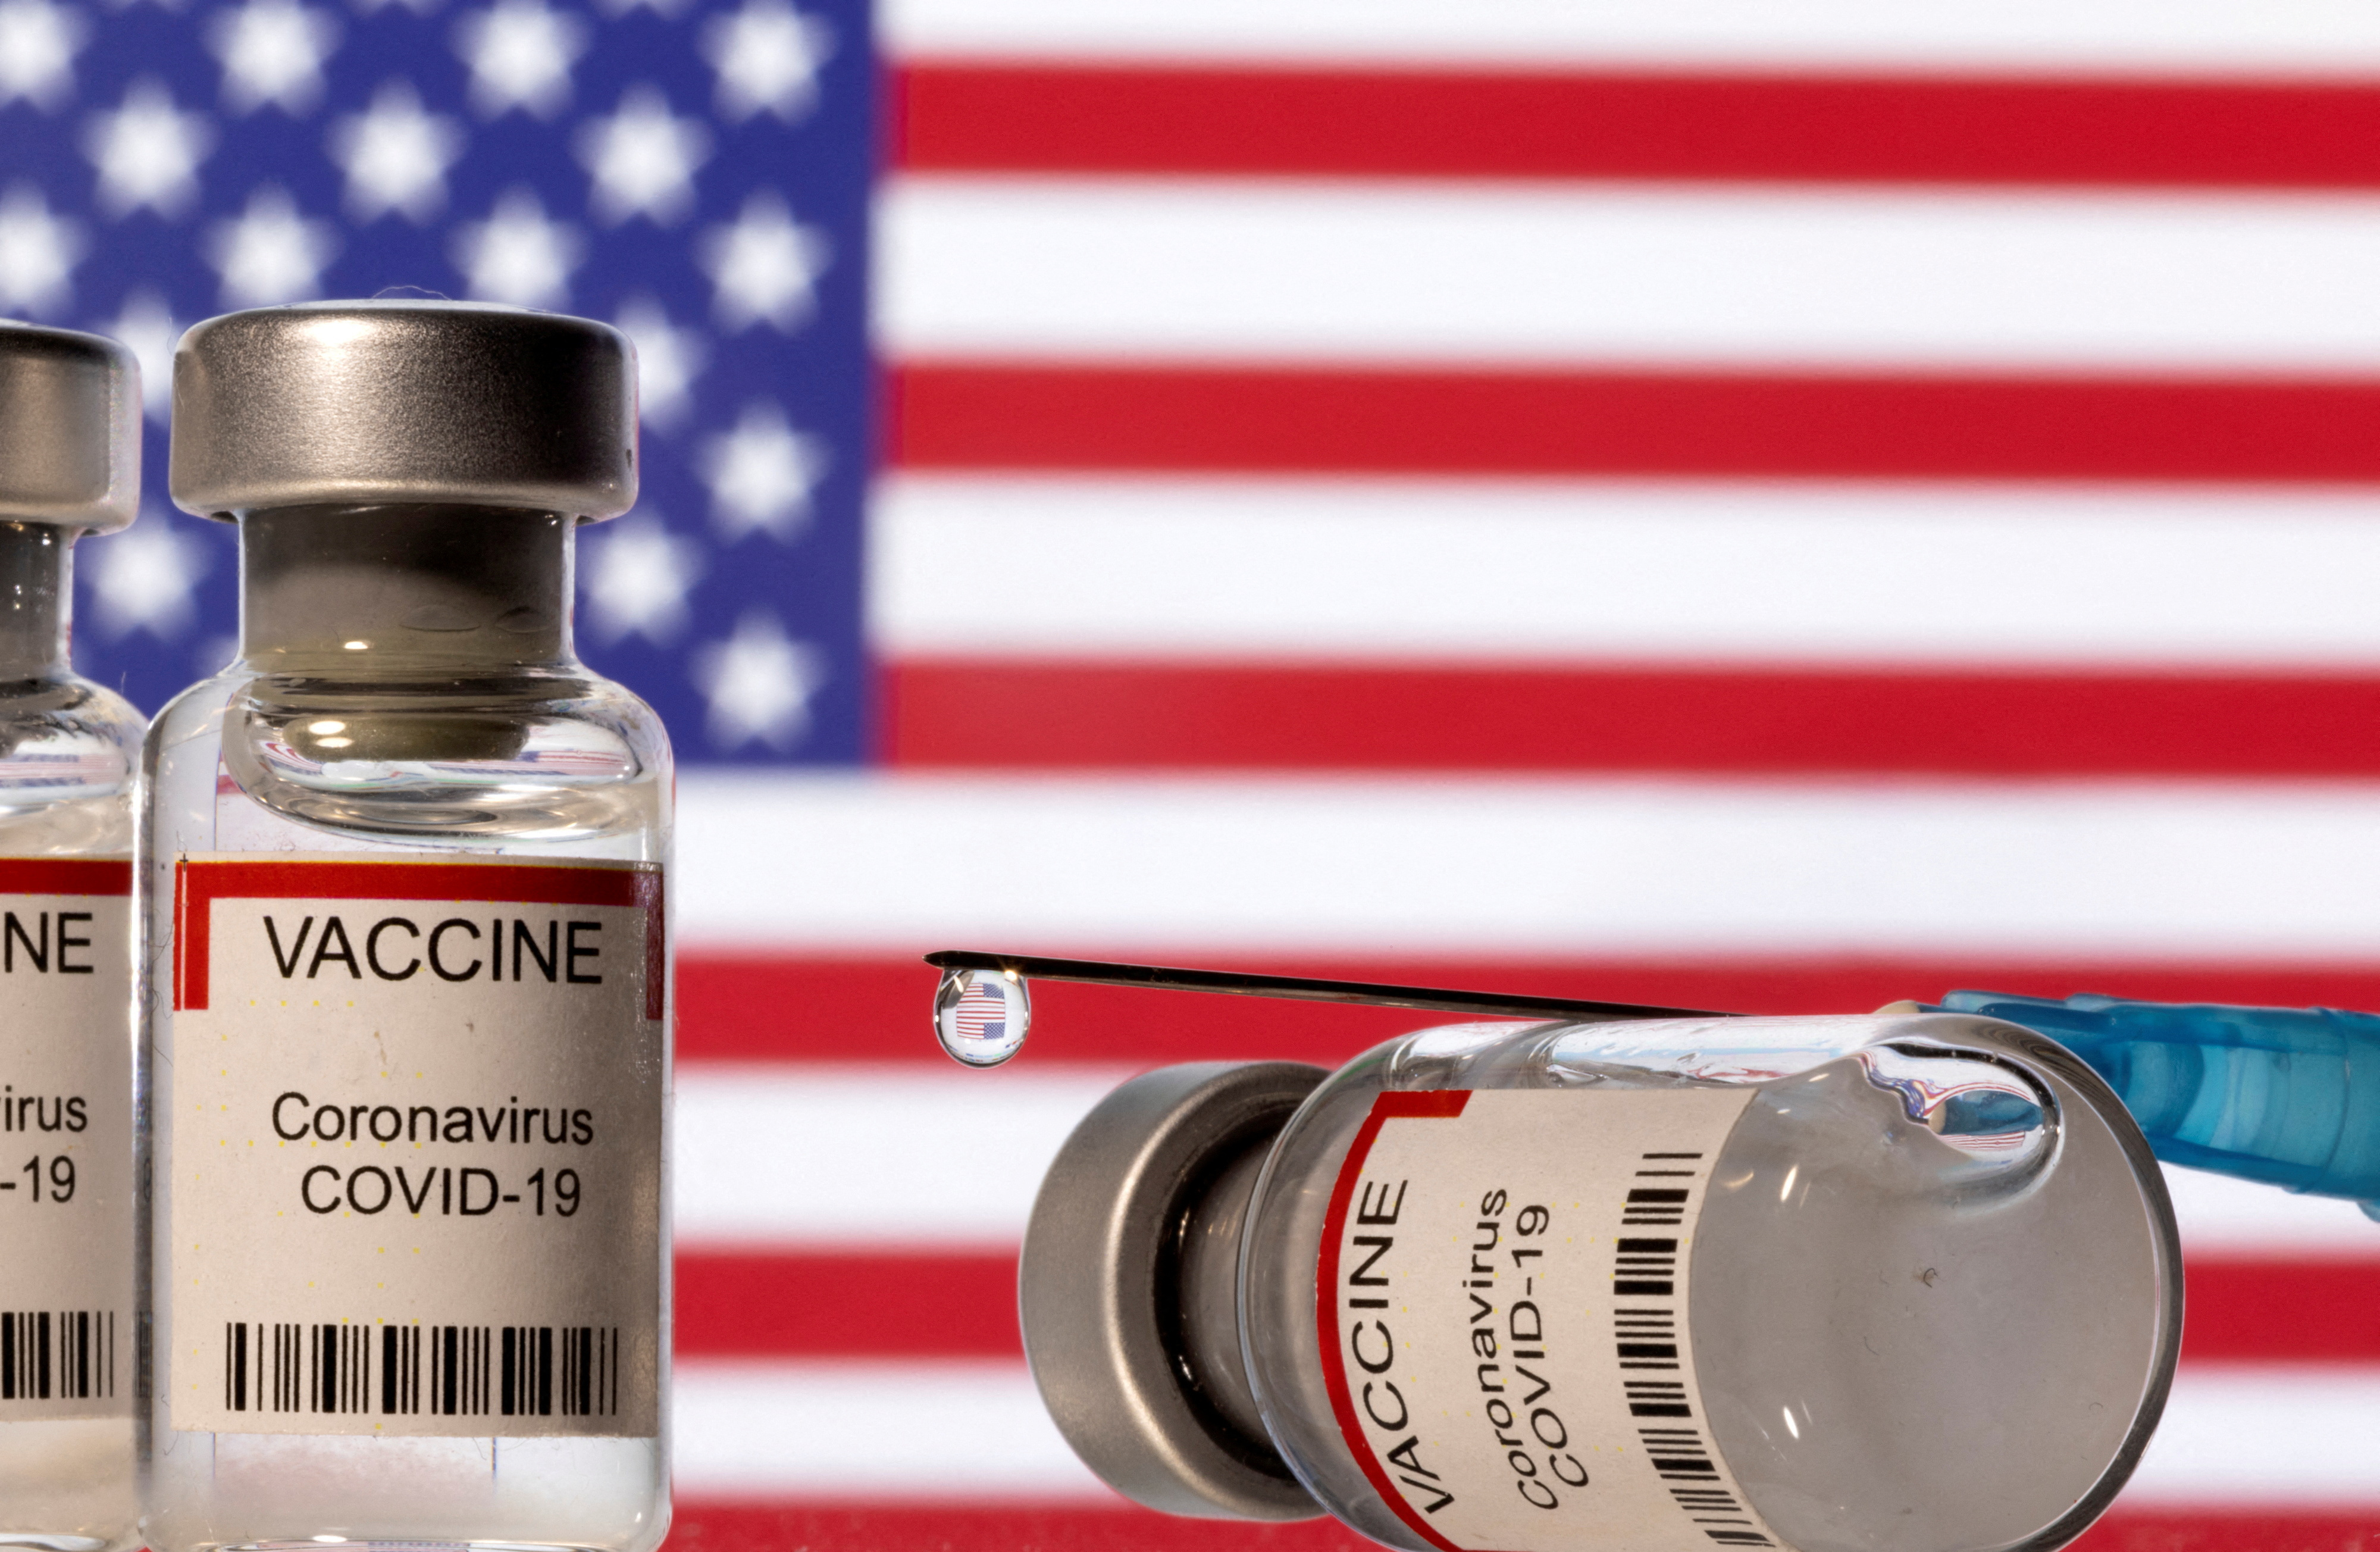 Illustration shows vials labelled "VACCINE Coronavirus COVID-19" and a syringe in front of a displayed U.S. flag